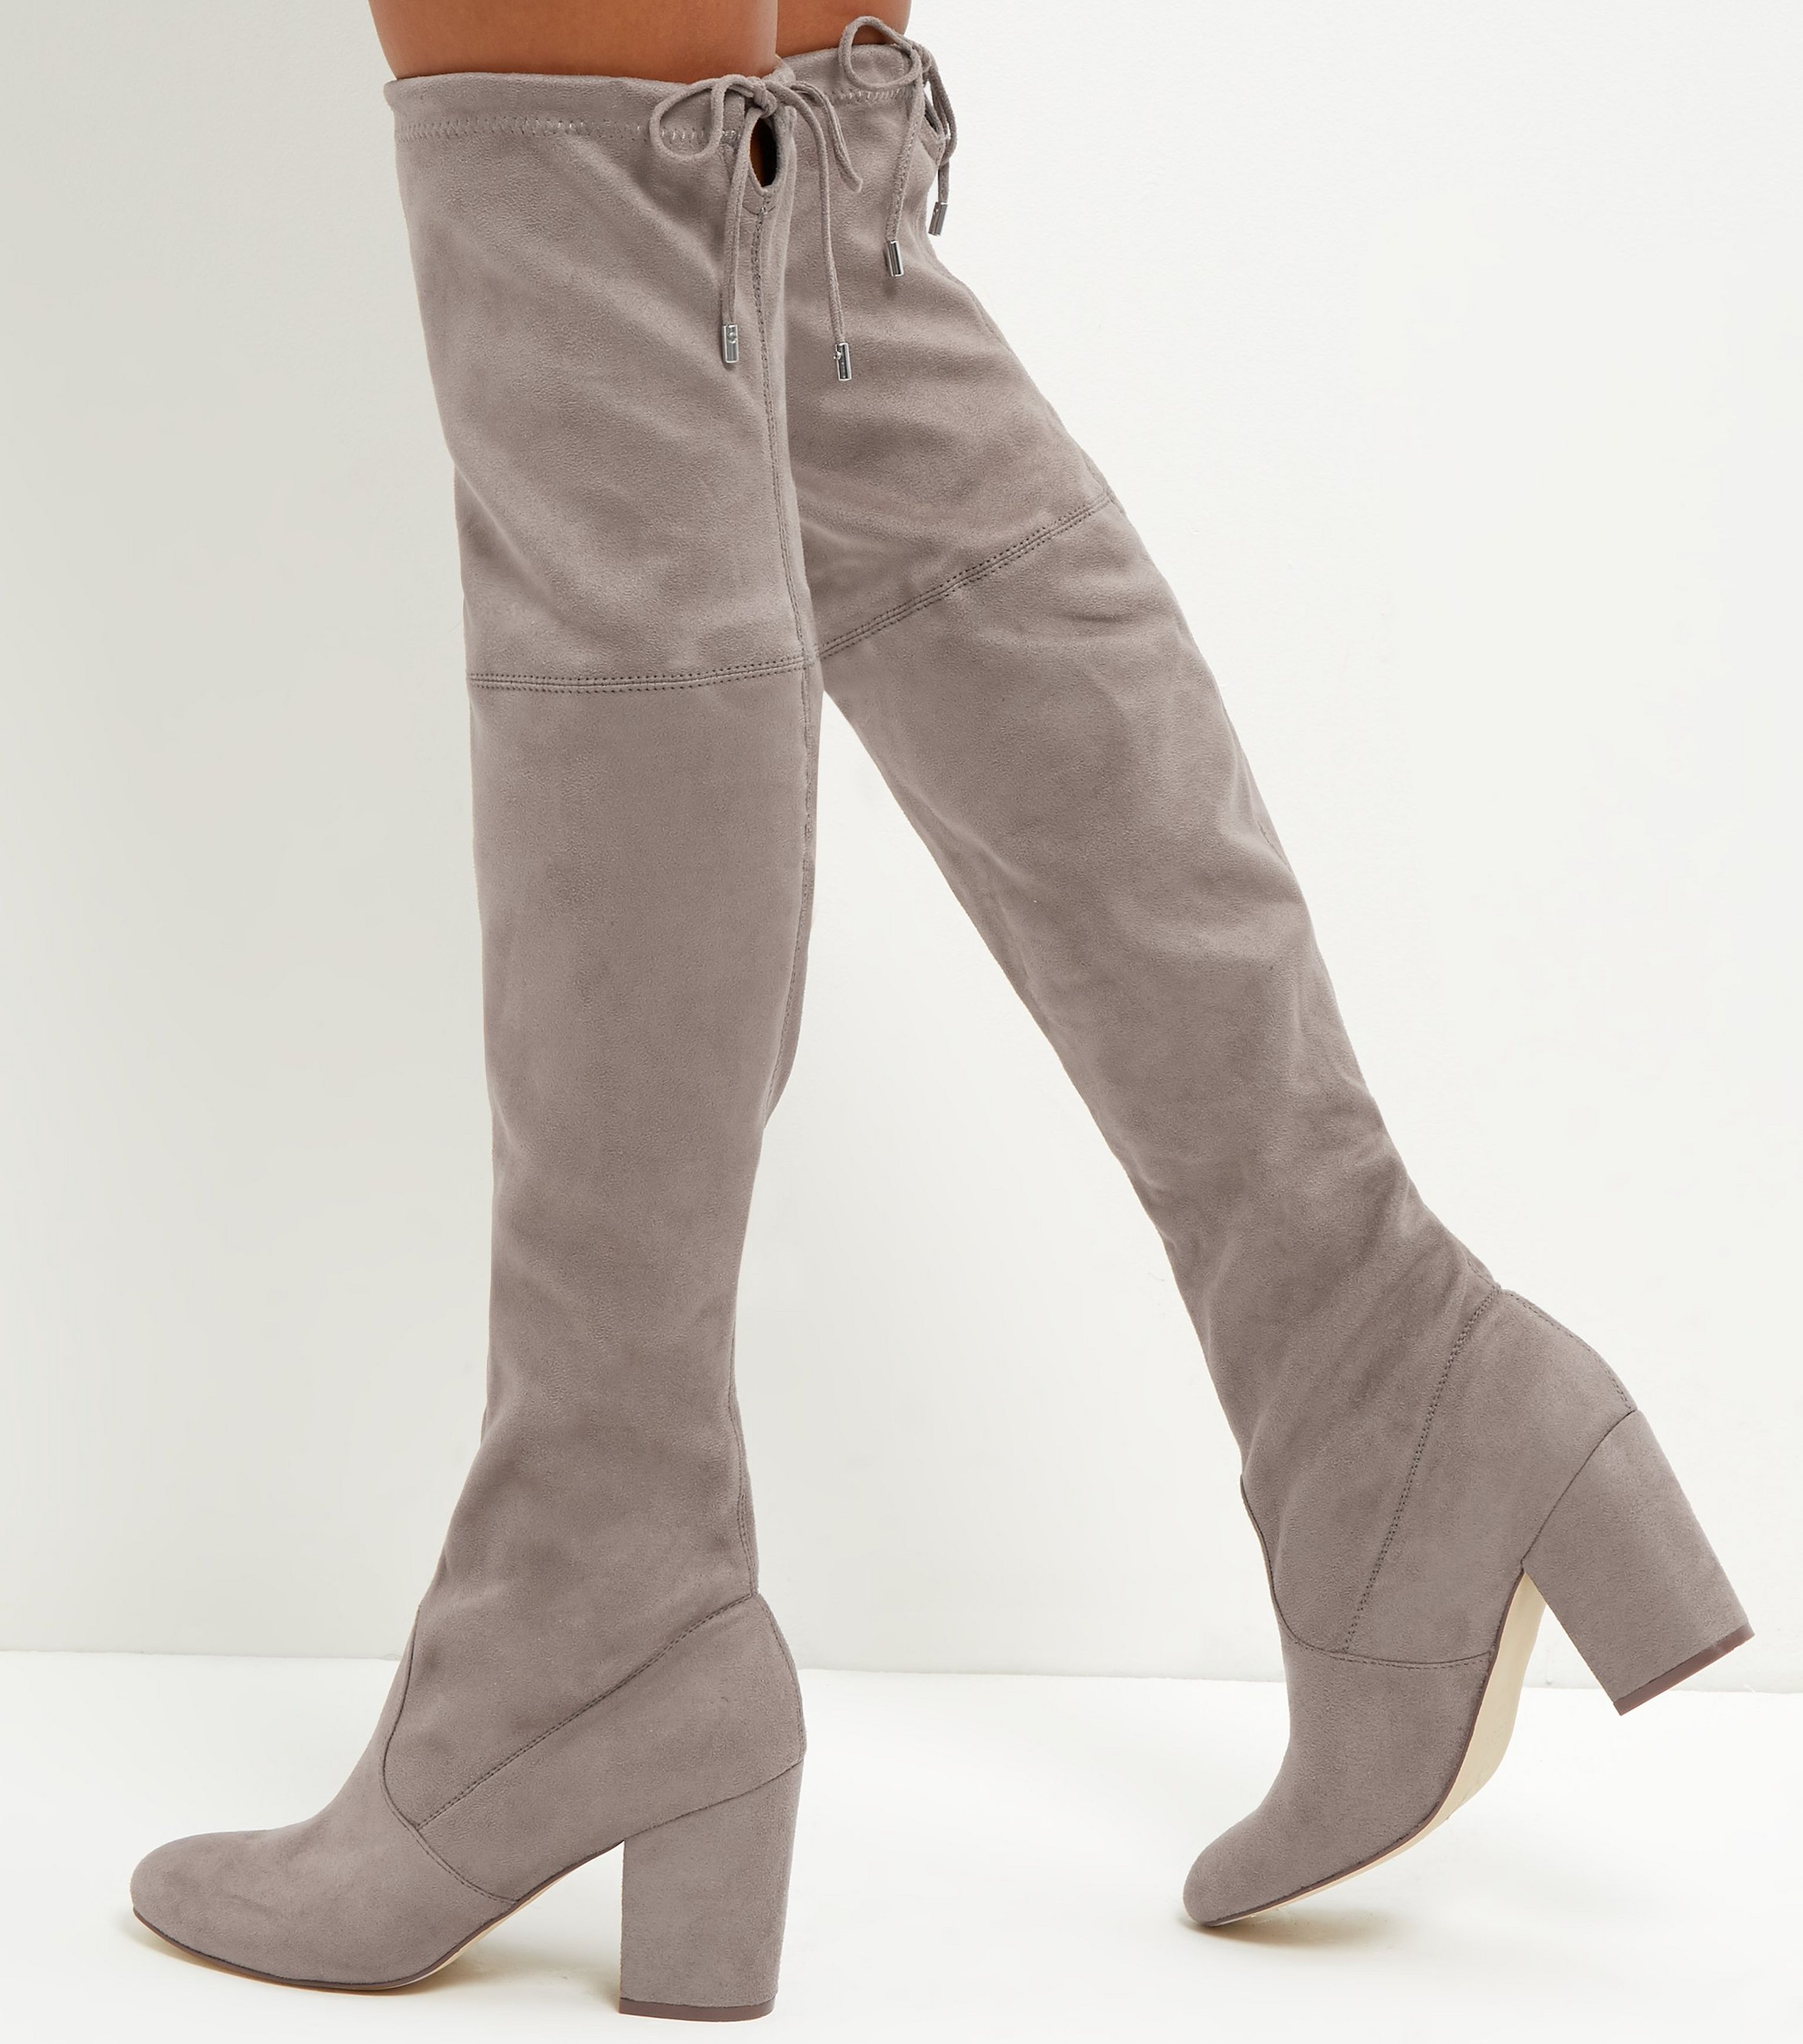 light-brown-suedette-above-the-knee-boots